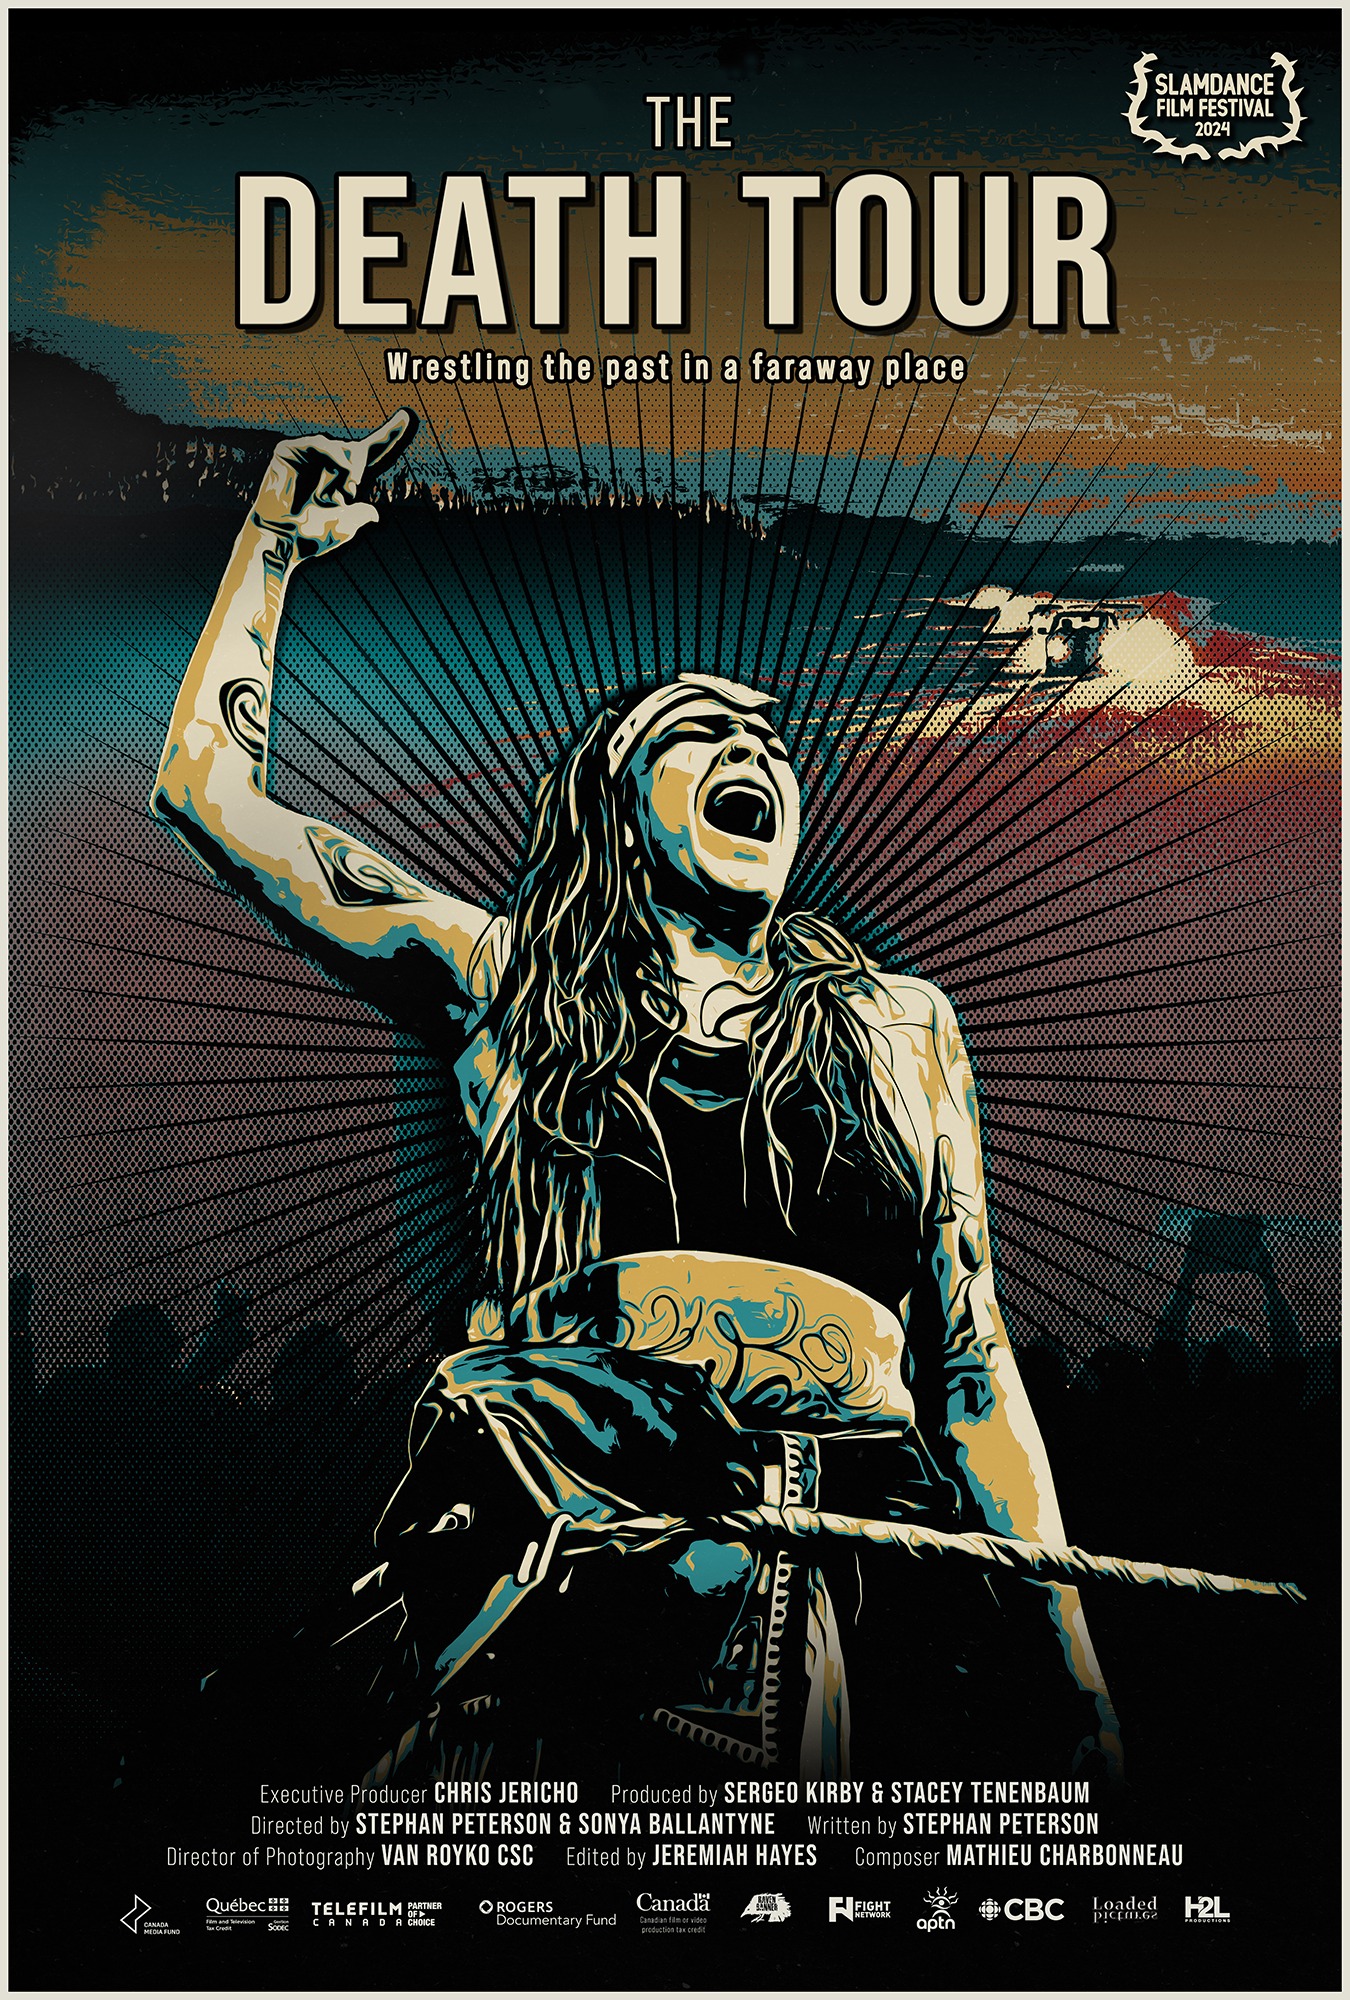 The Death Tour Poster featuring Sage Morin